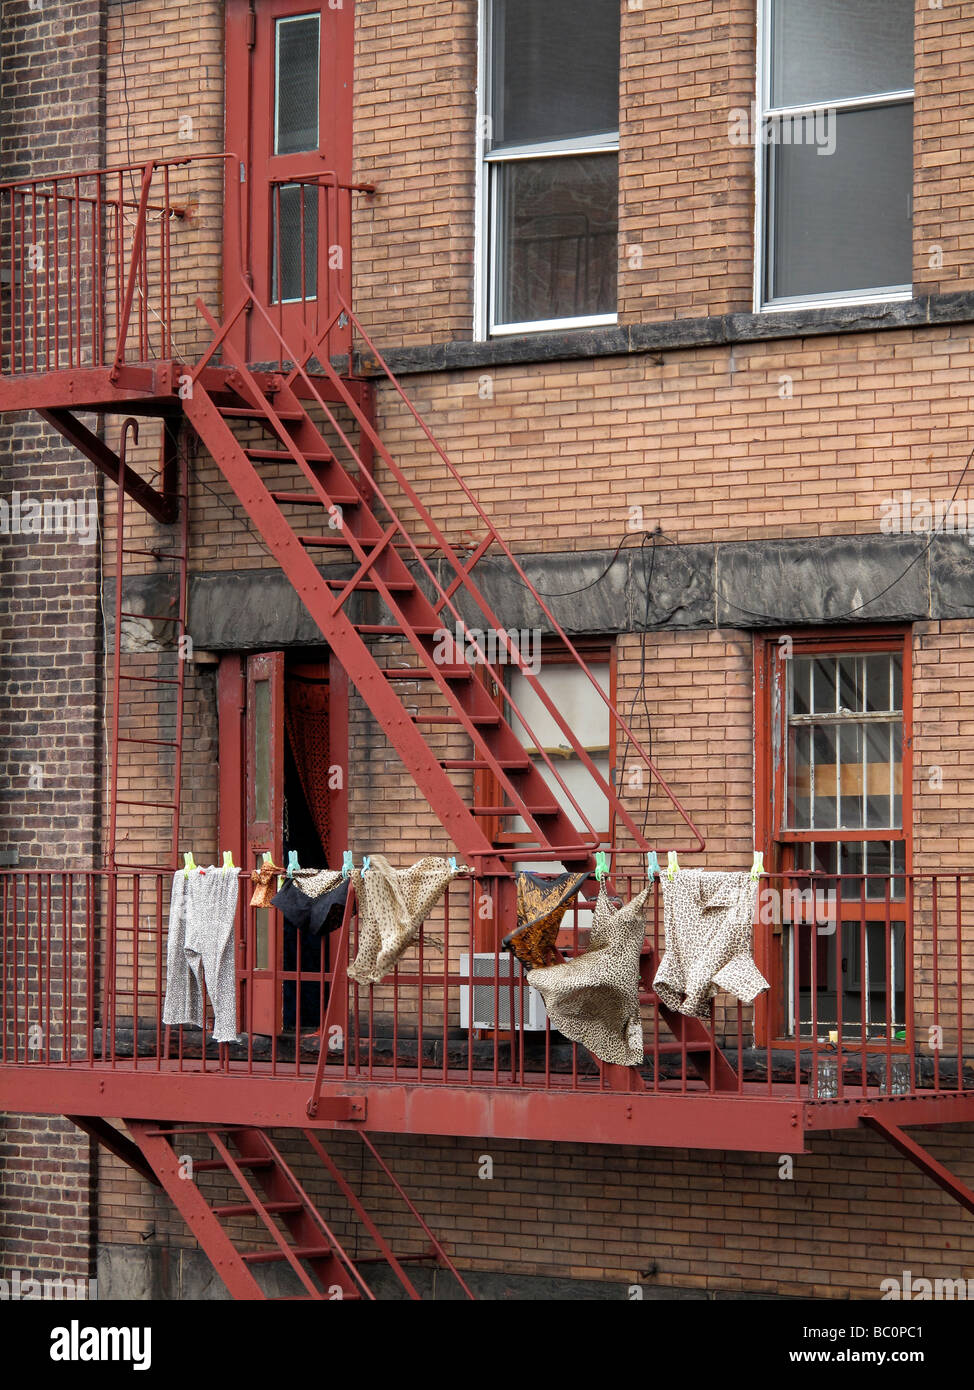 Laundry drying on a New York City fire escape. Stock Photo